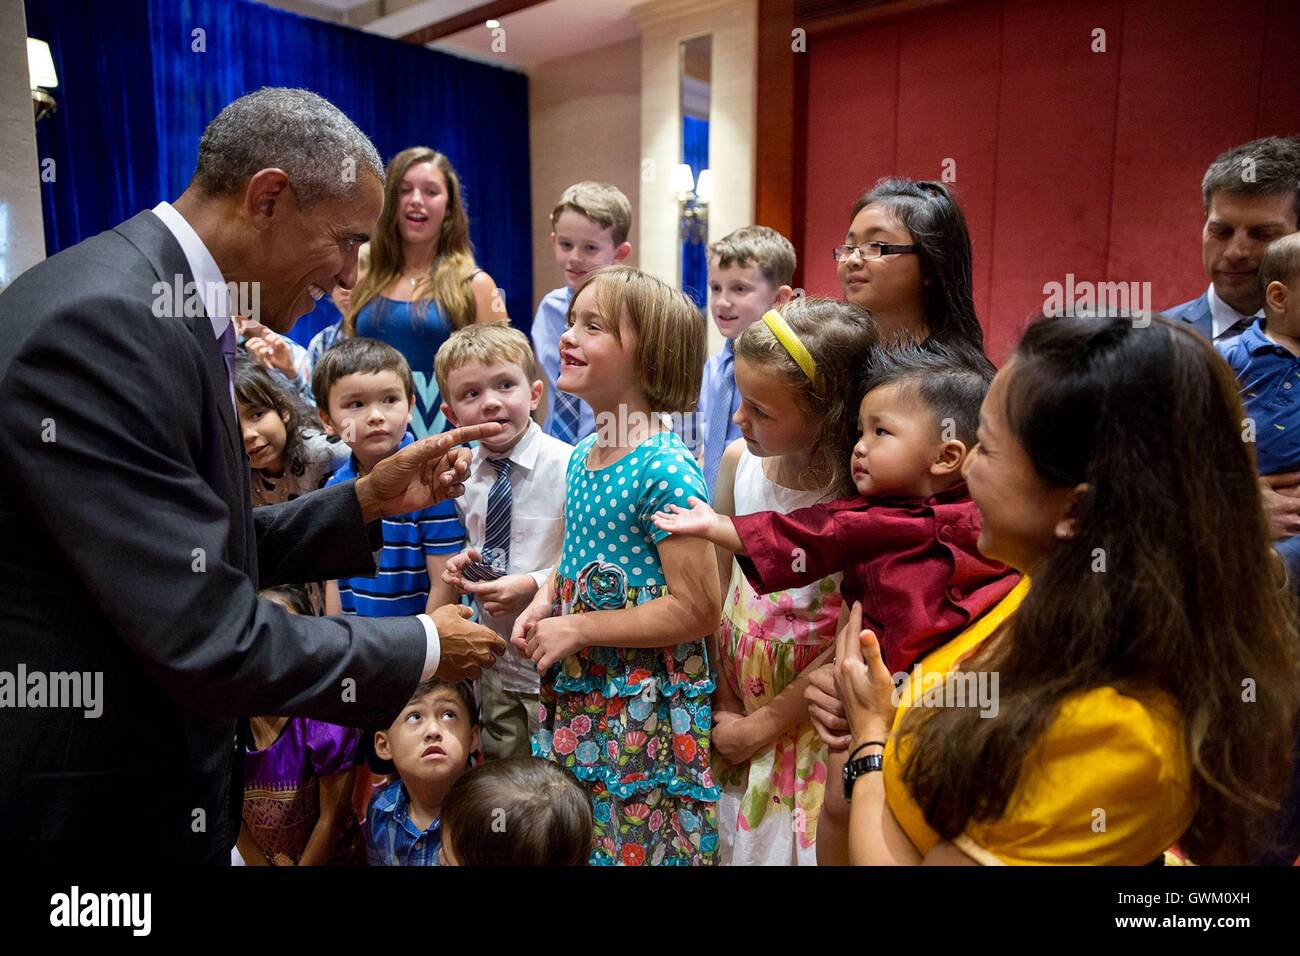 U.S President Barack Obama greets children of the U.S. Embassy staff September 5, 2016 in Vientiane, Laos. Obama is in Laos for the ASEAN Summit. Stock Photo